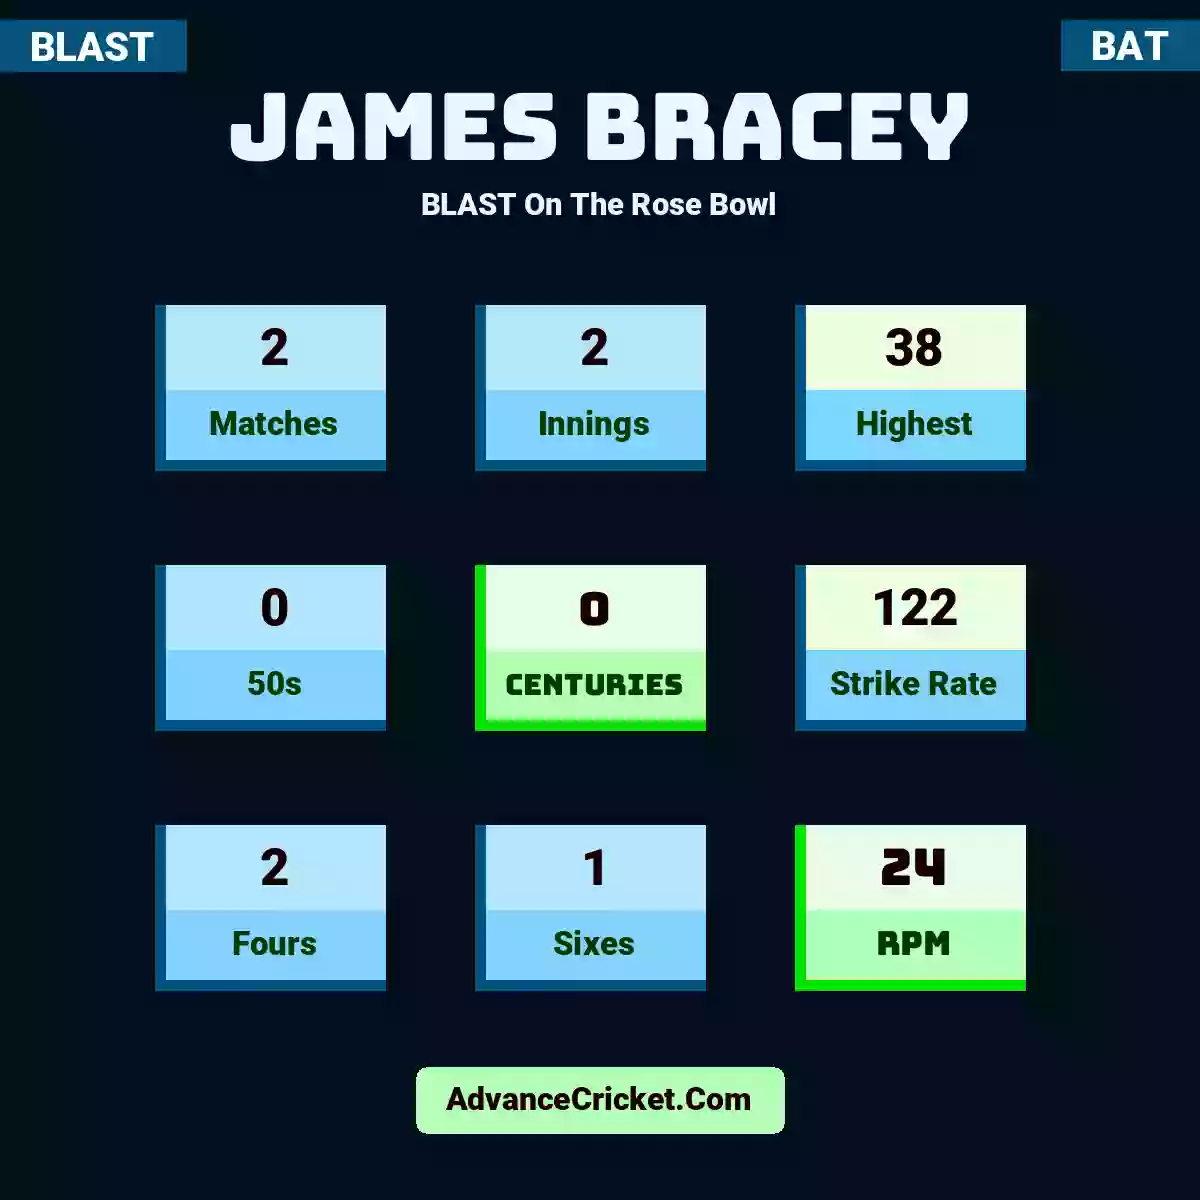 James Bracey BLAST  On The Rose Bowl, James Bracey played 2 matches, scored 38 runs as highest, 0 half-centuries, and 0 centuries, with a strike rate of 122. J.Bracey hit 2 fours and 1 sixes, with an RPM of 24.